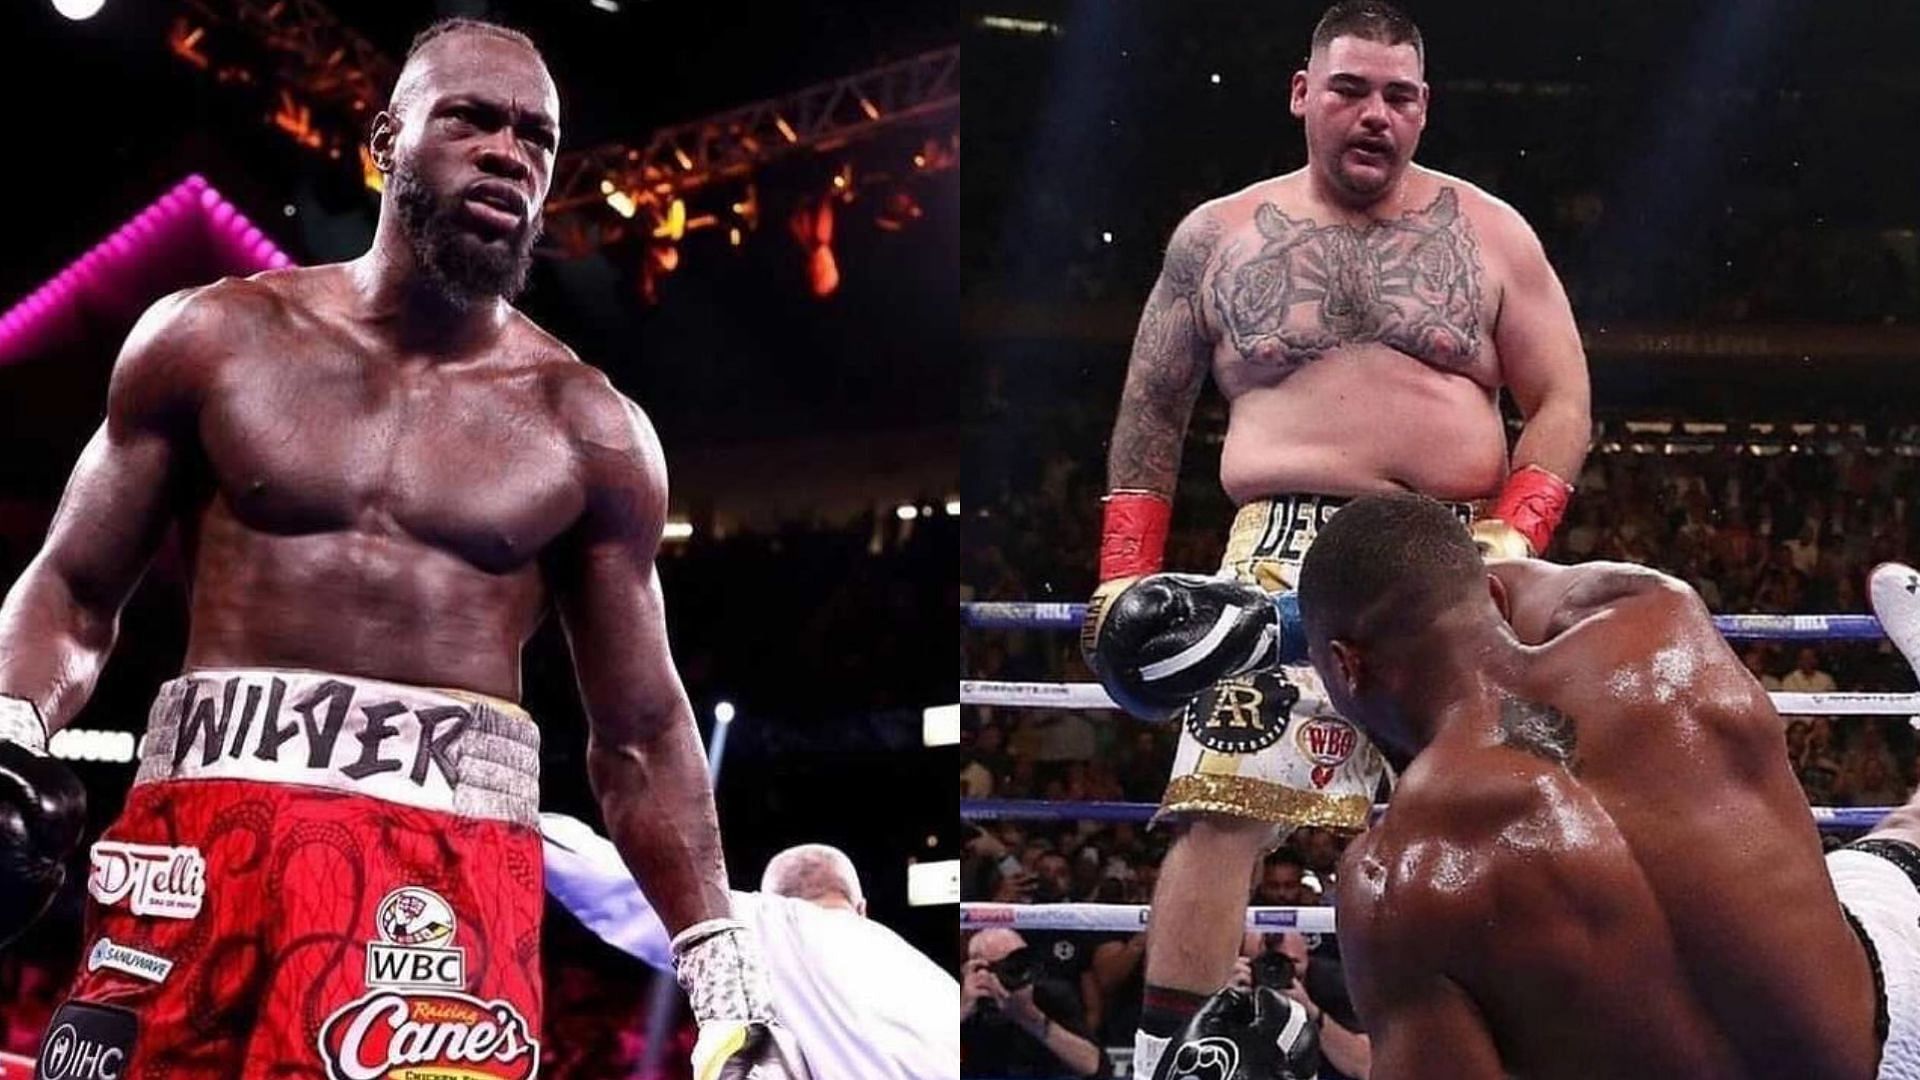 Deontay Wilder (left, @bronzebomber), Andy Ruiz Jr. dropping Anthony Joshua (right, @andy_destroyer13), [Credits: Instagram]